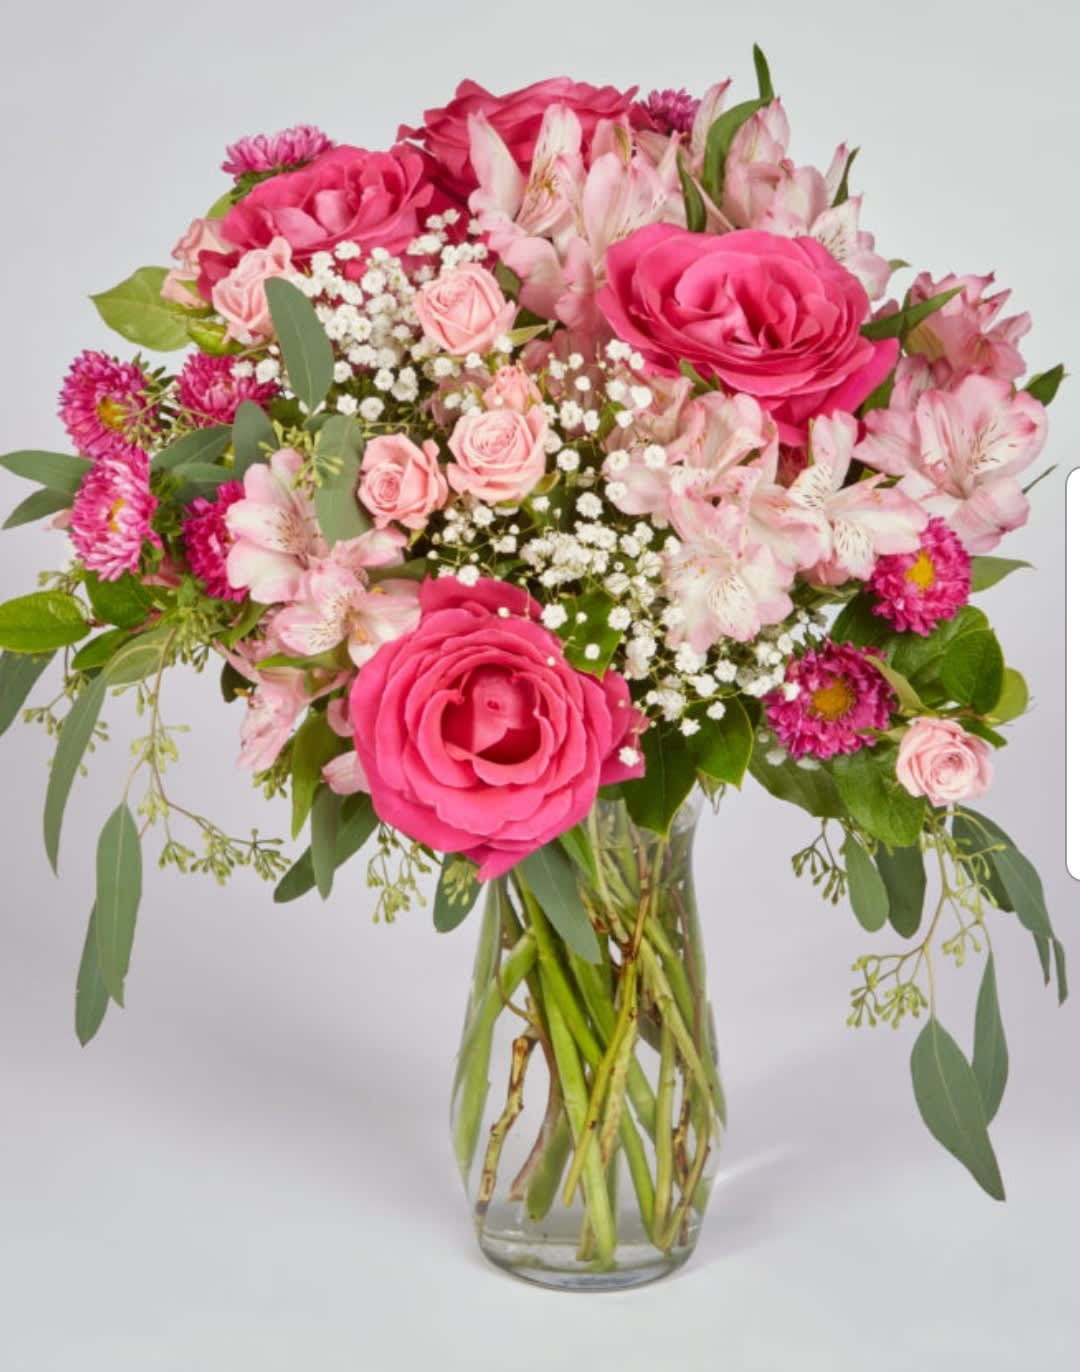 Positively Pink - This fun, flirty arrangement is just the right gift for that special friend or special love. With roses, spray roses, alstro and asters designed in different shades of pinks. 